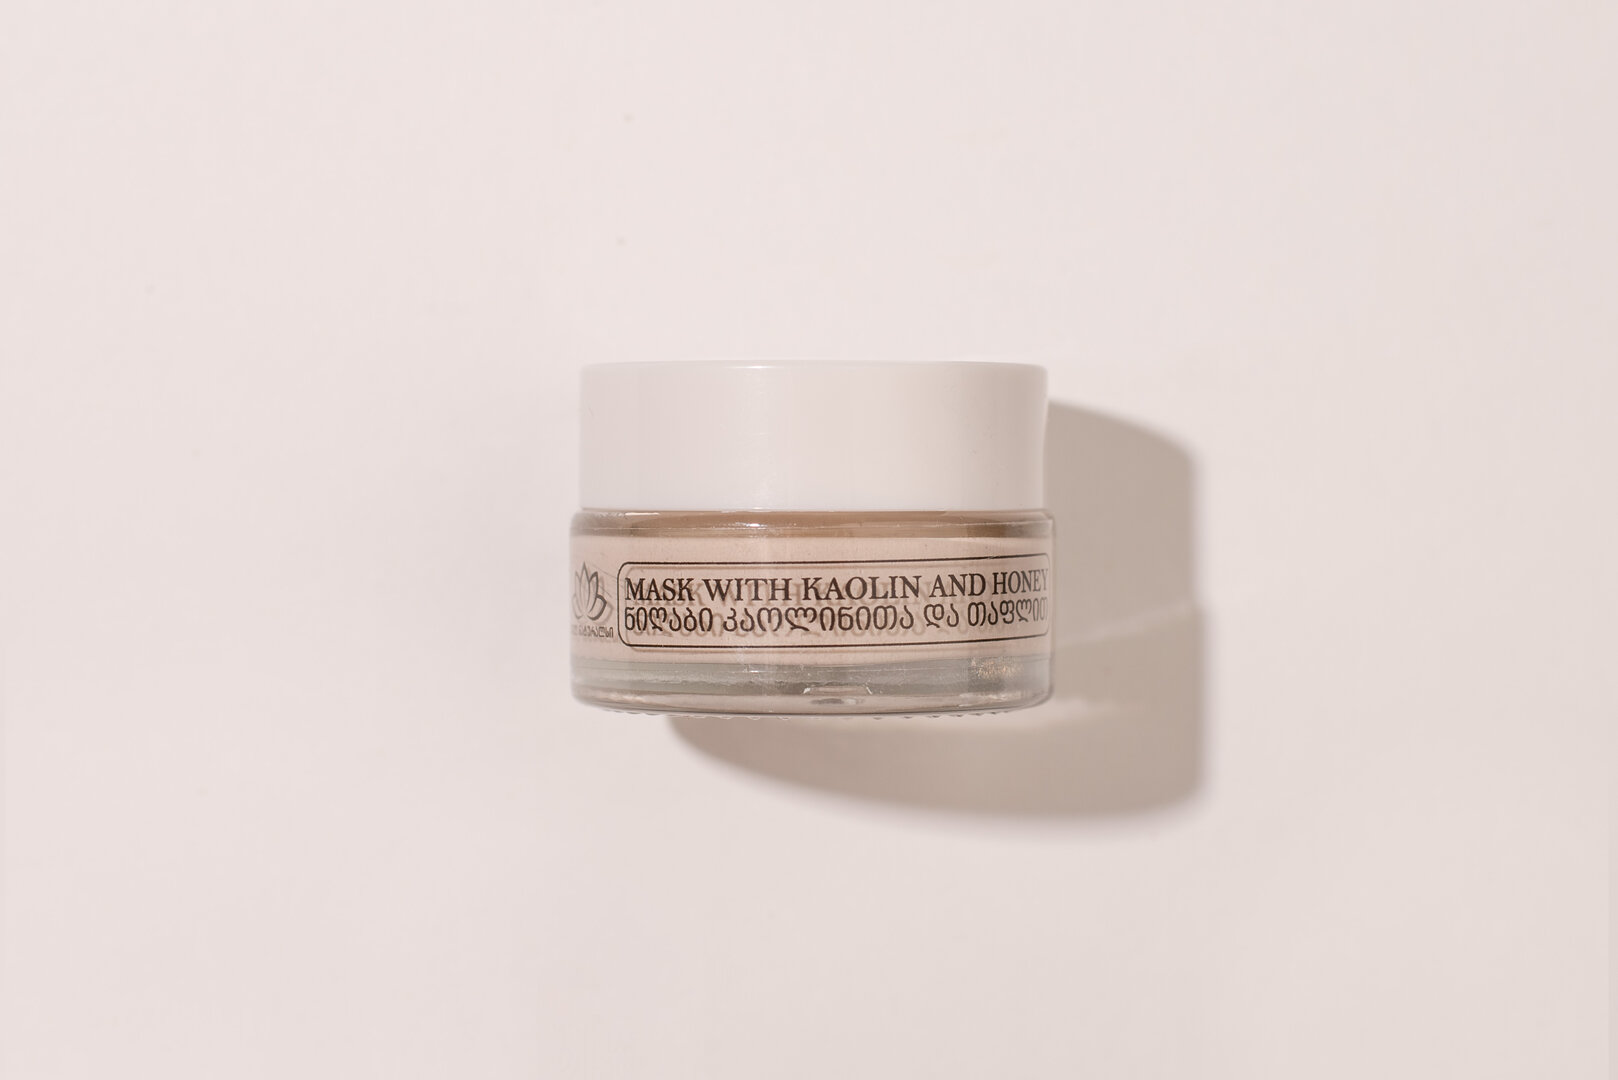 Mask with kaolin and honey